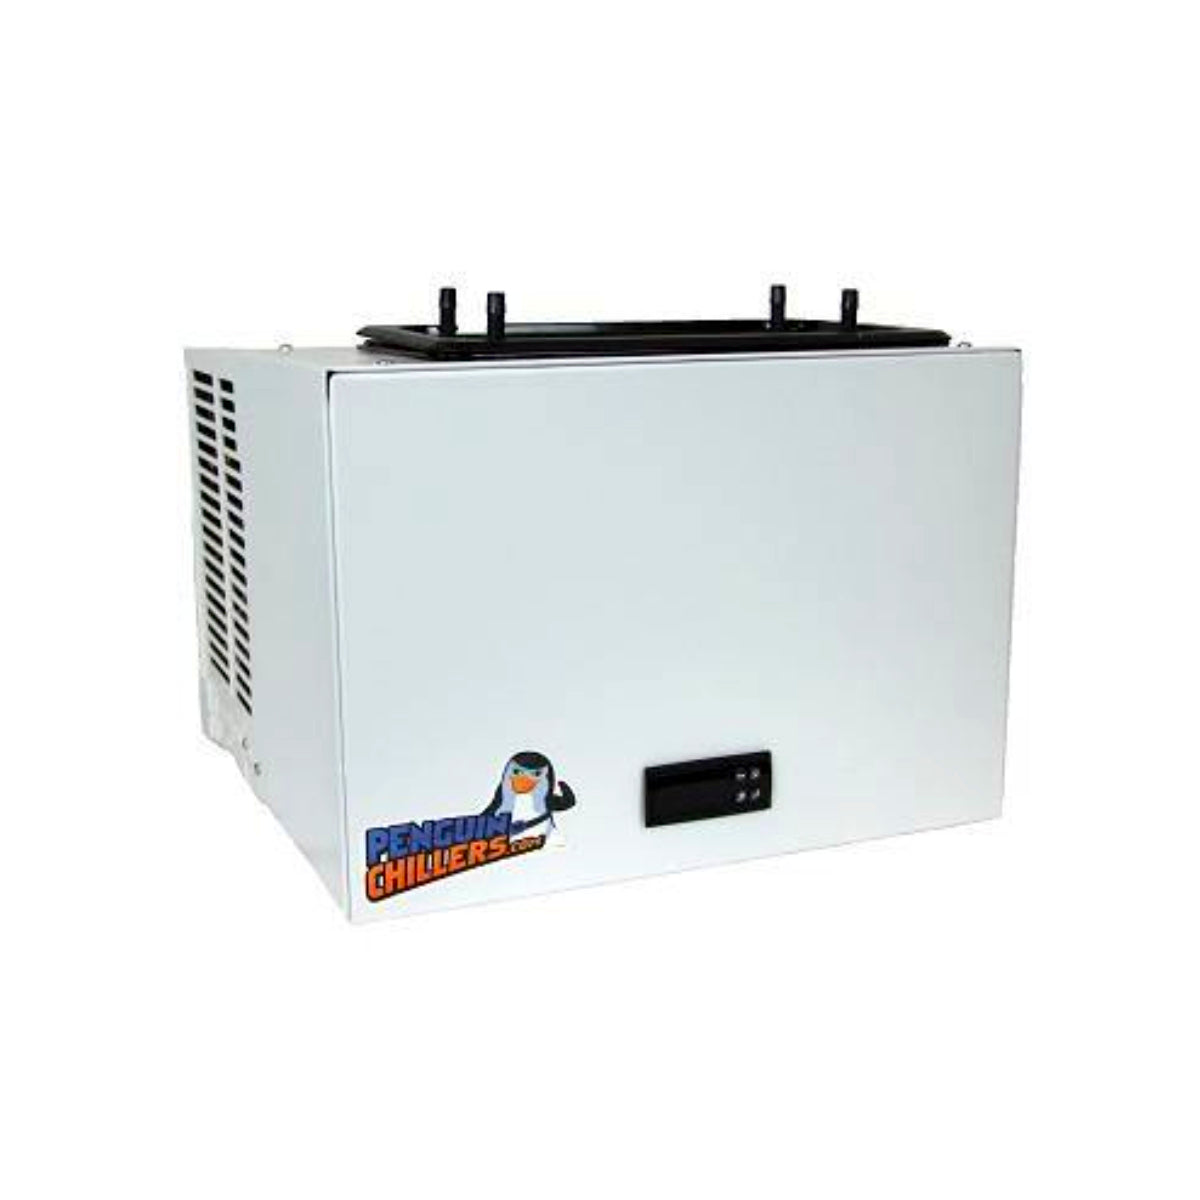 1 hp glycol chiller